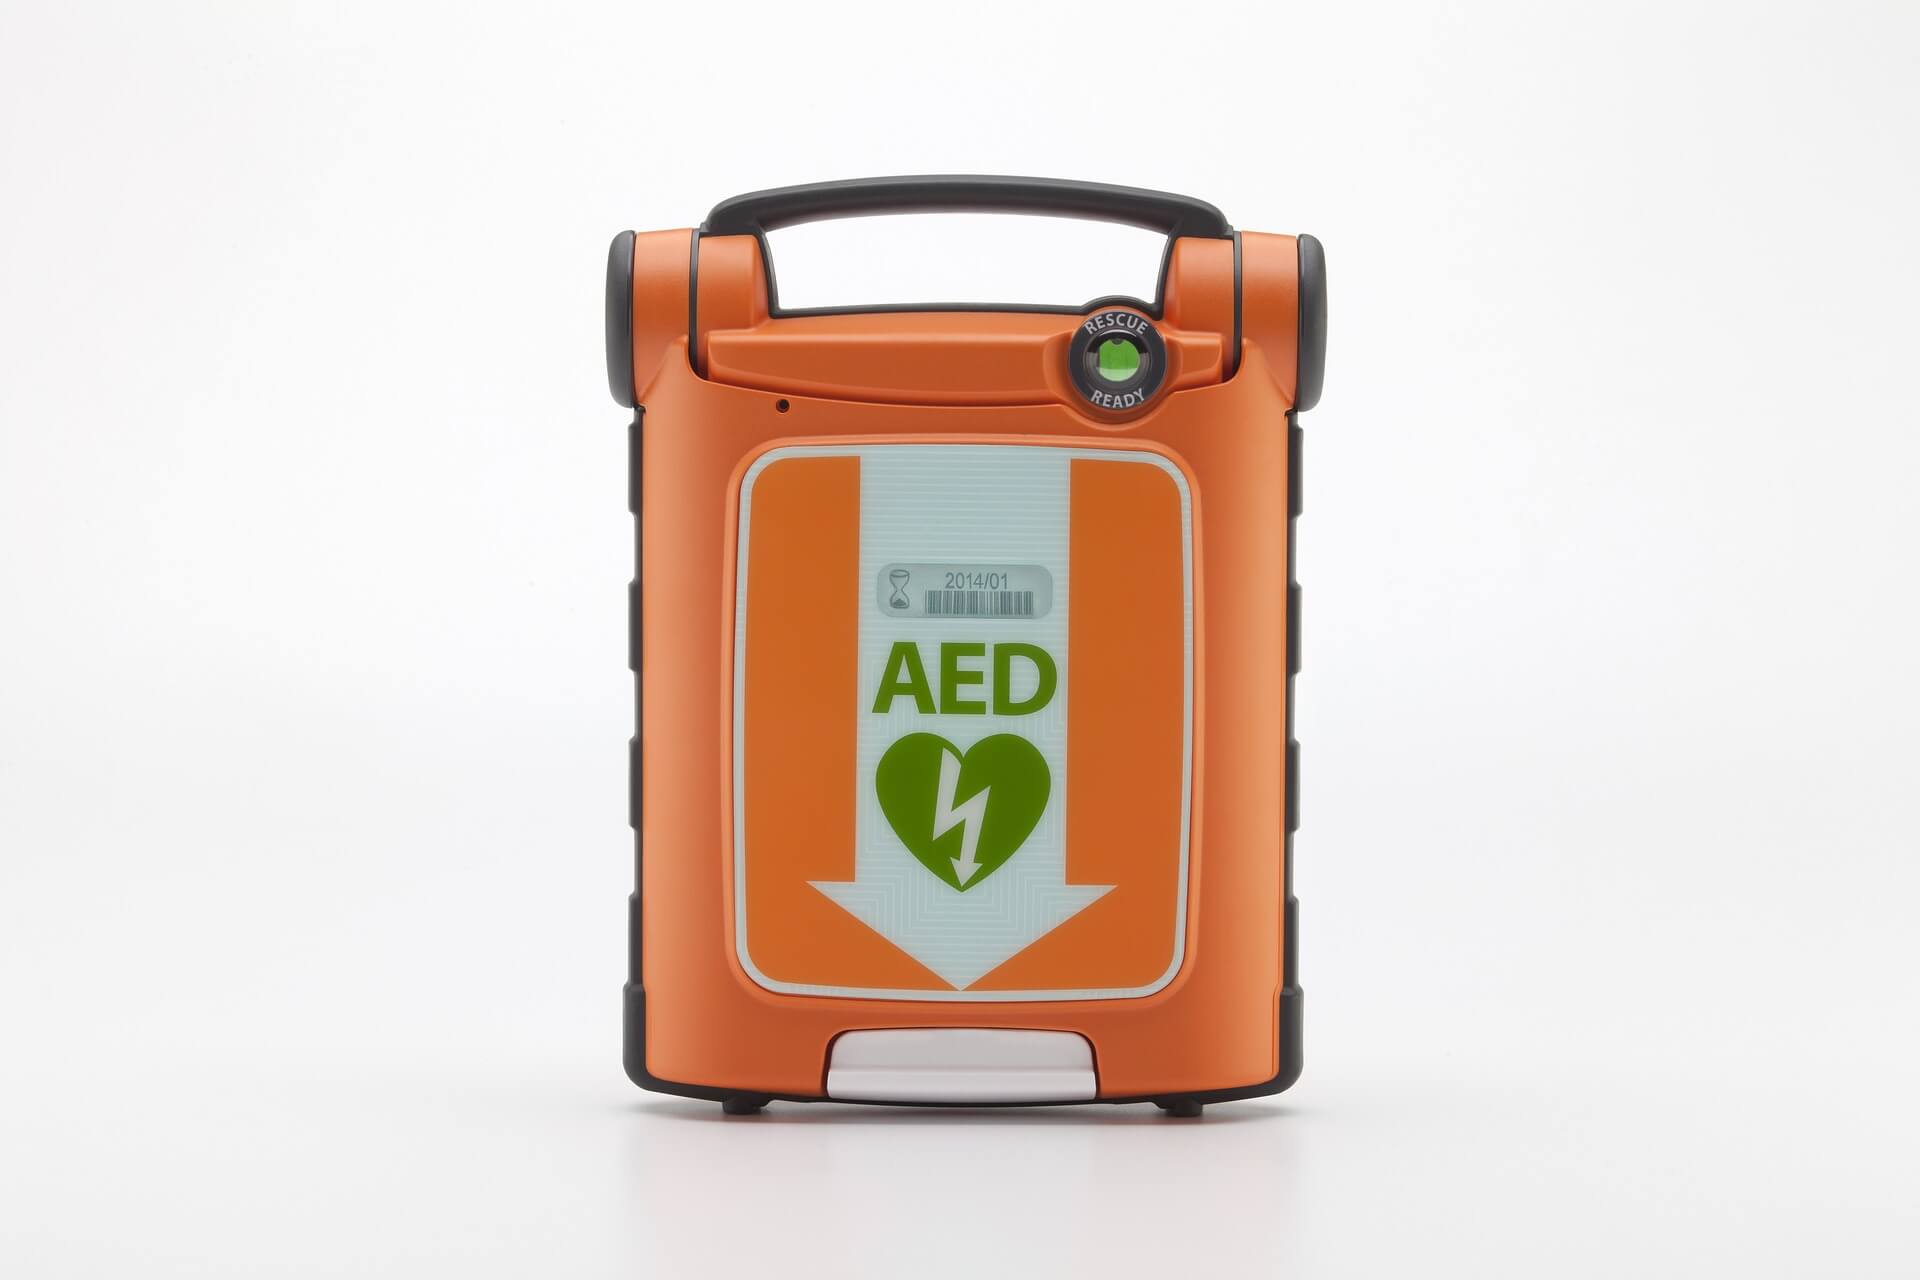 An aed is shown with a green arrow.